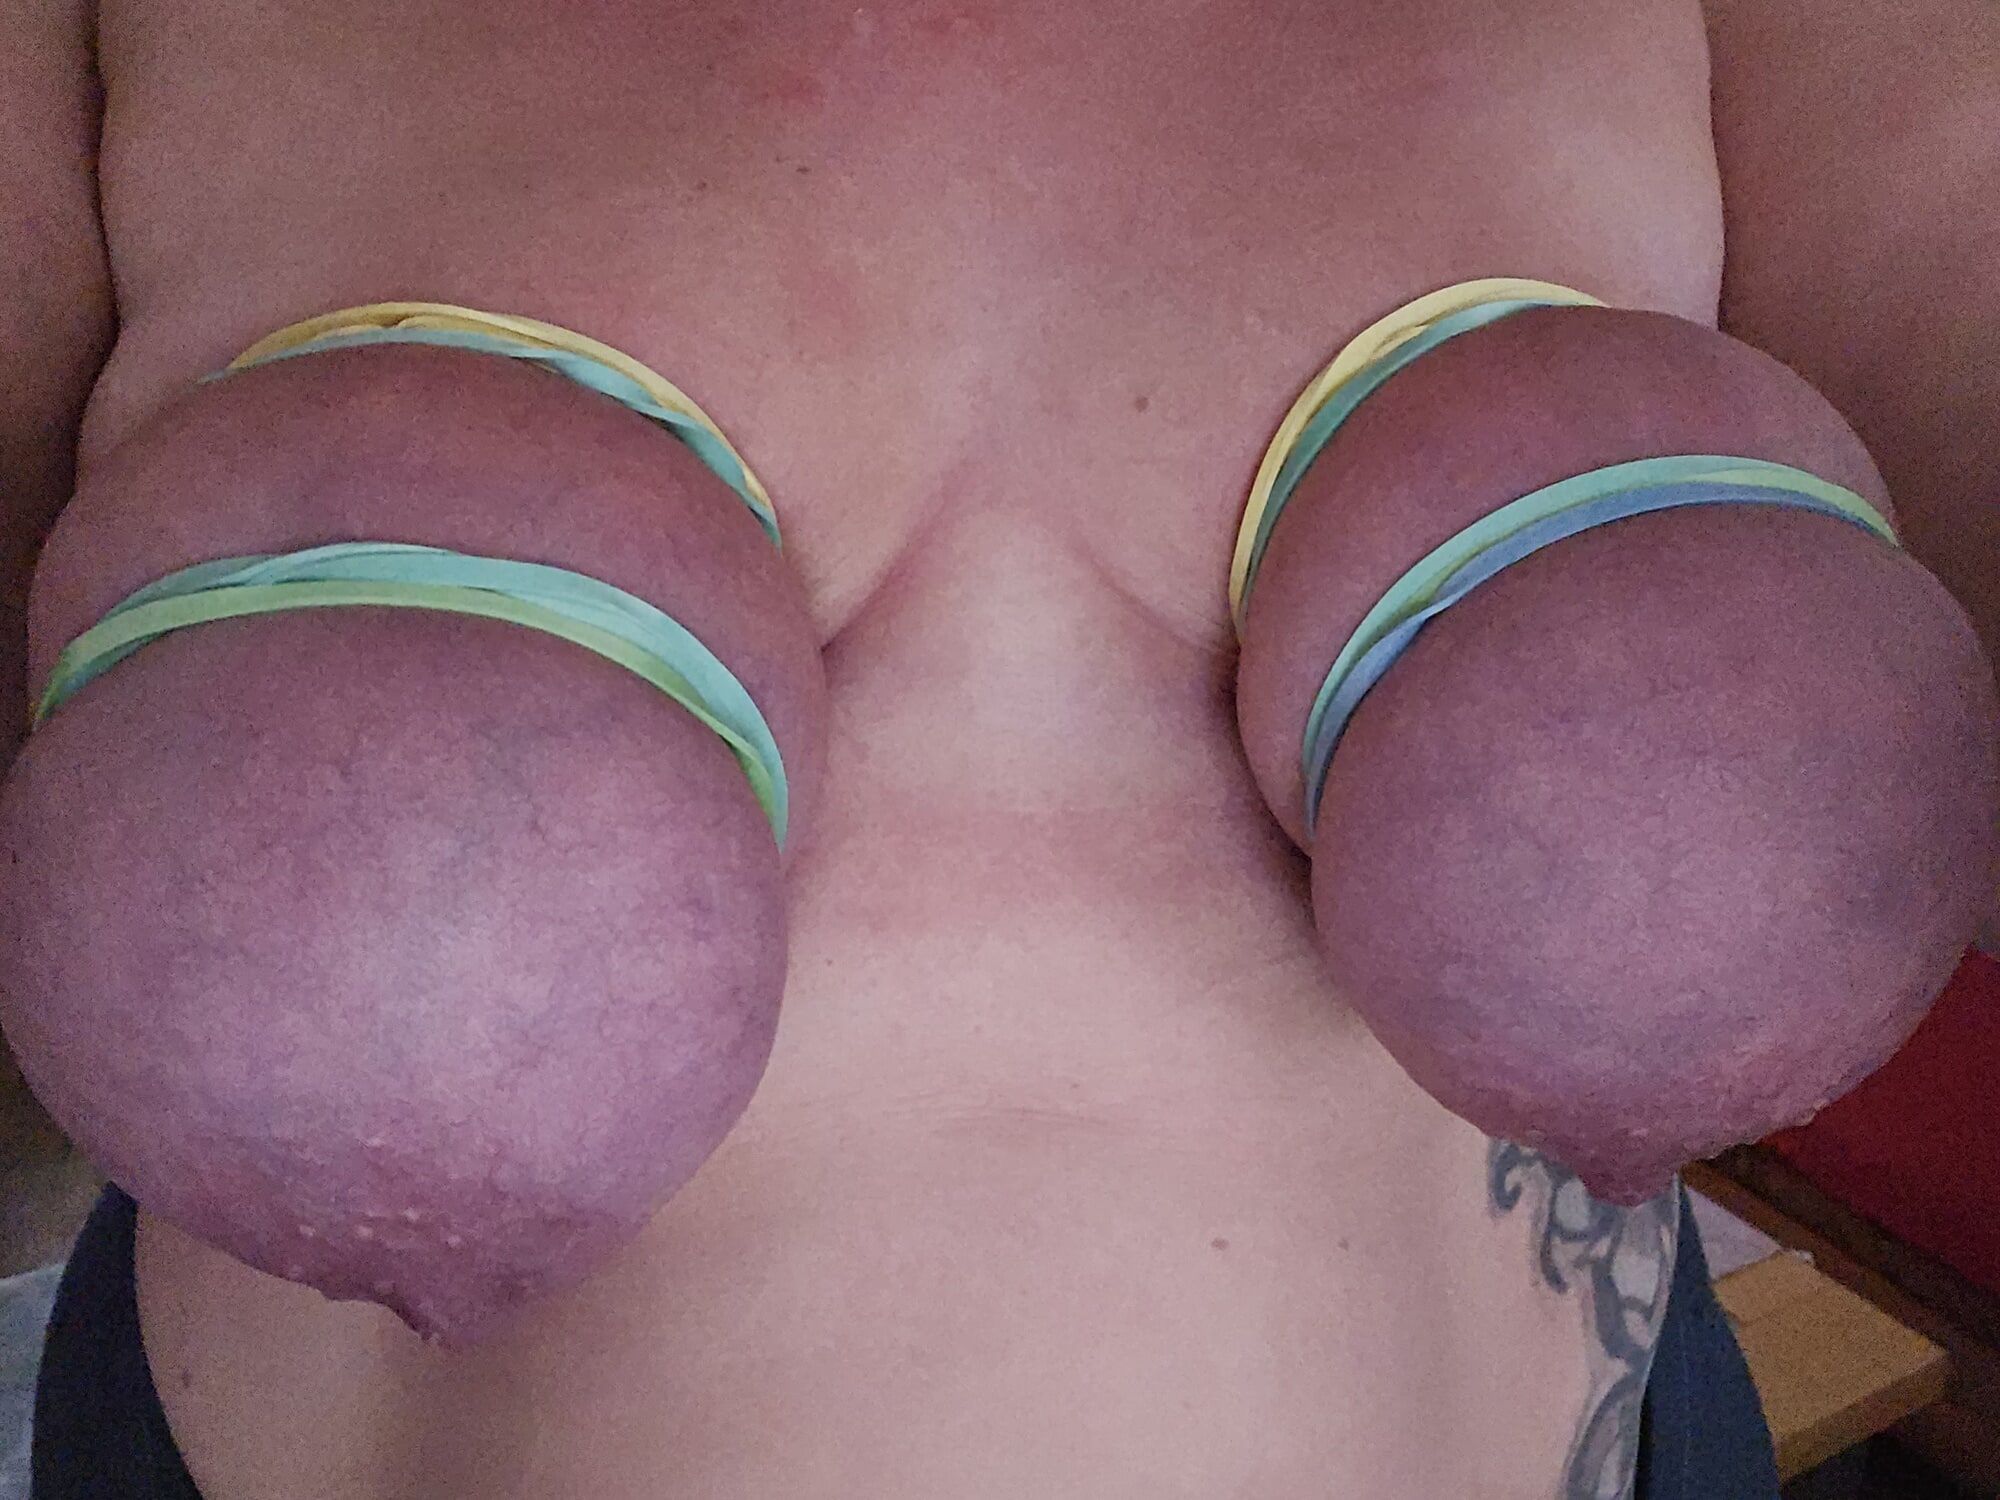 rubber bands on my tits #2